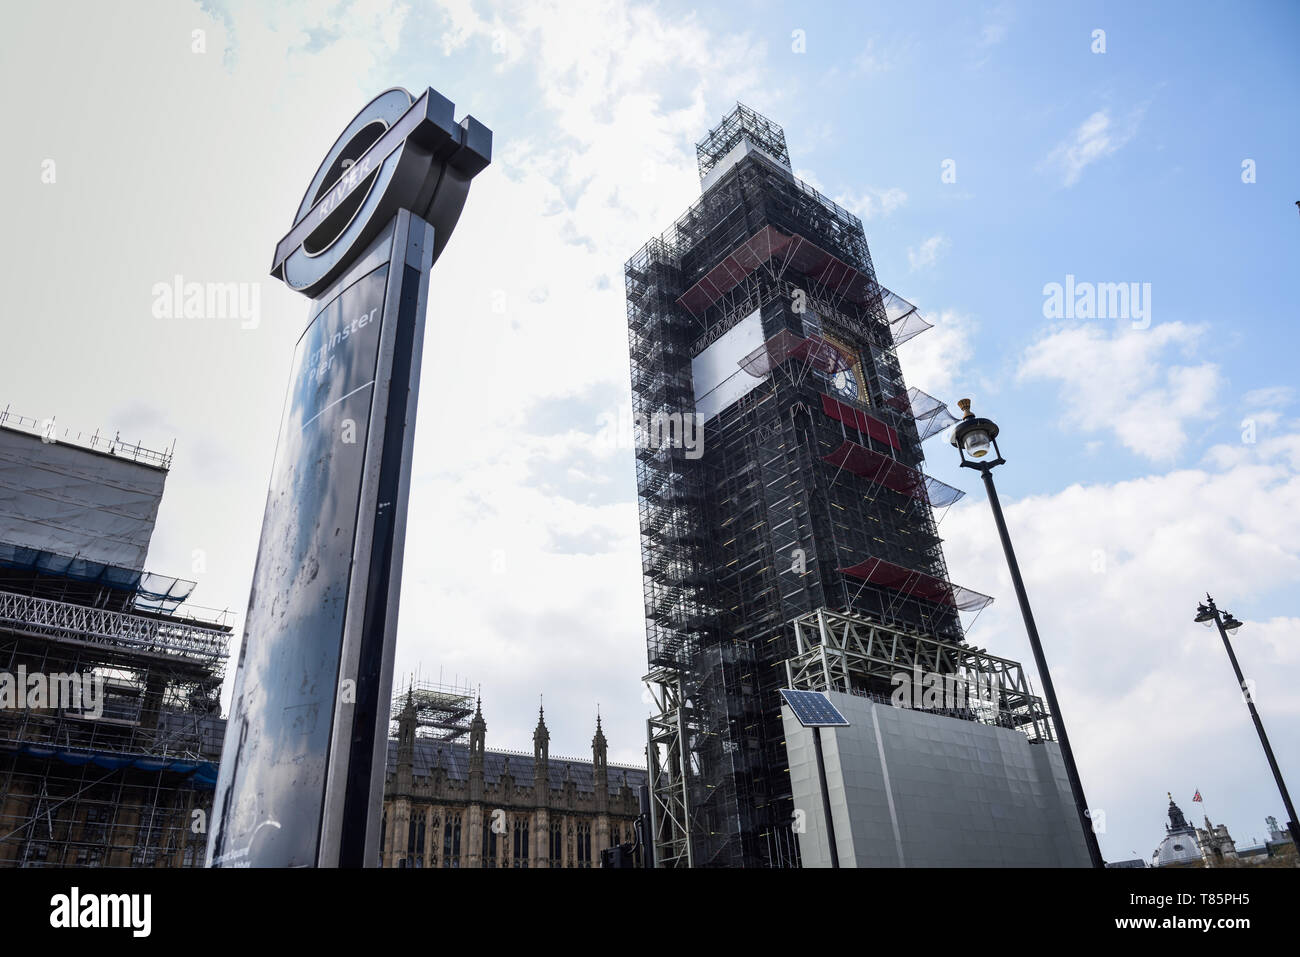 LONDON, ENGLAND, UK. 13TH APRIL, 2019 Scaffolding around the Elizabeth Tower, more commonly known as Big Ben, during the extensive restoration and rep Stock Photo